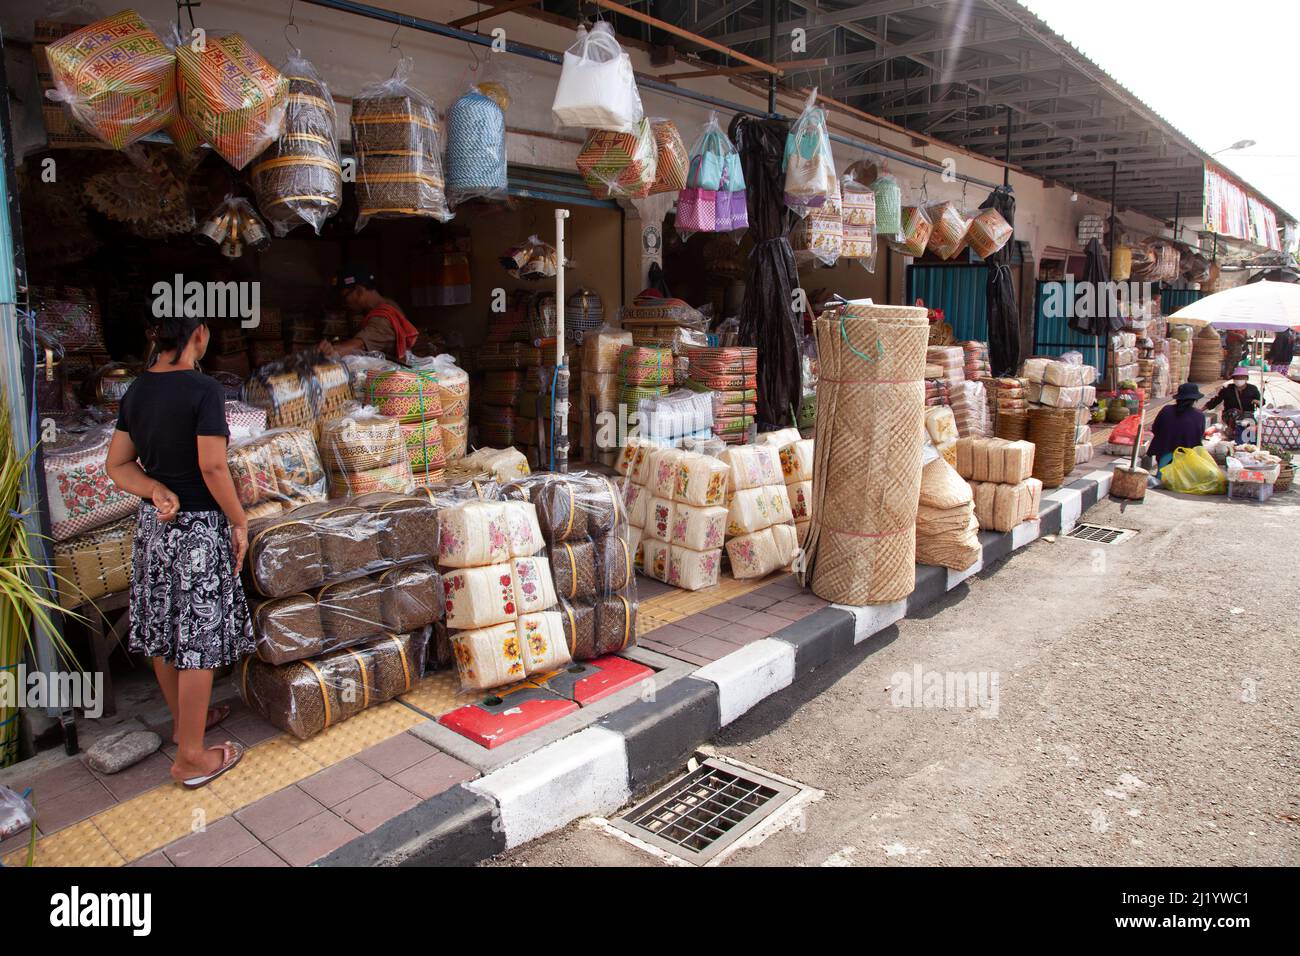 A row of shops selling rattan baskets and wares in Sukawati Market, Bali, Indonesia. Stock Photo